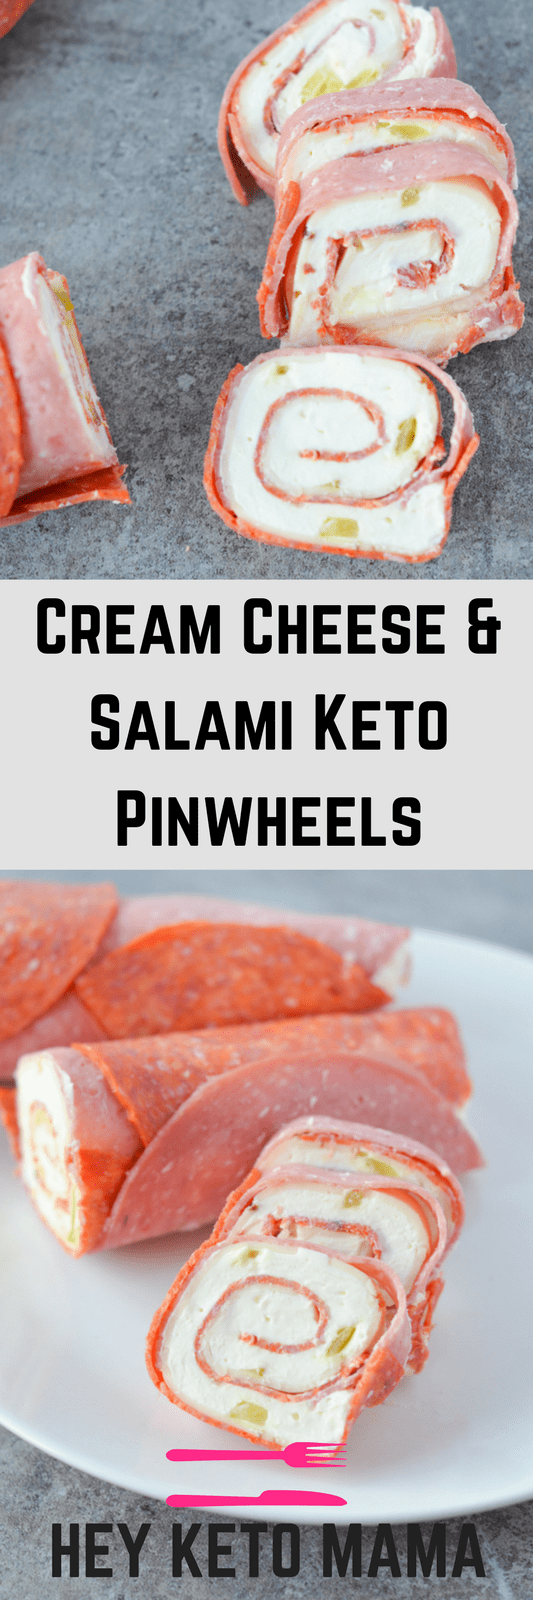 These keto pinwheels are so delicious, you won't even miss the tortilla! | heyketomama.com